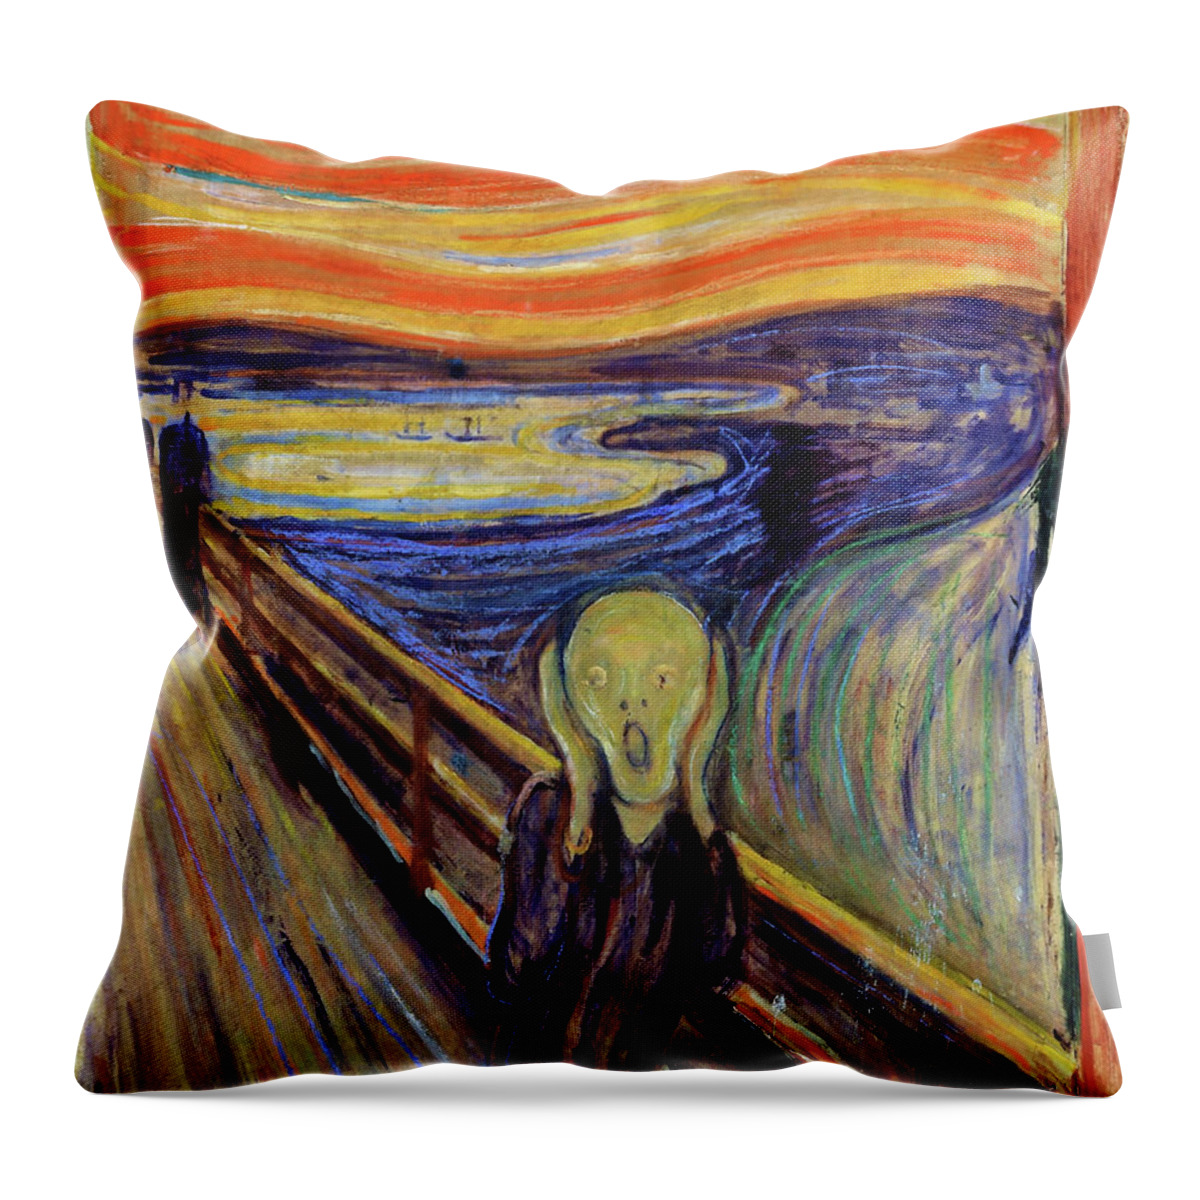 Edvard Munch Throw Pillow featuring the painting The Scream 1893 - Digital Remastered Edition2 by Edvard Munch